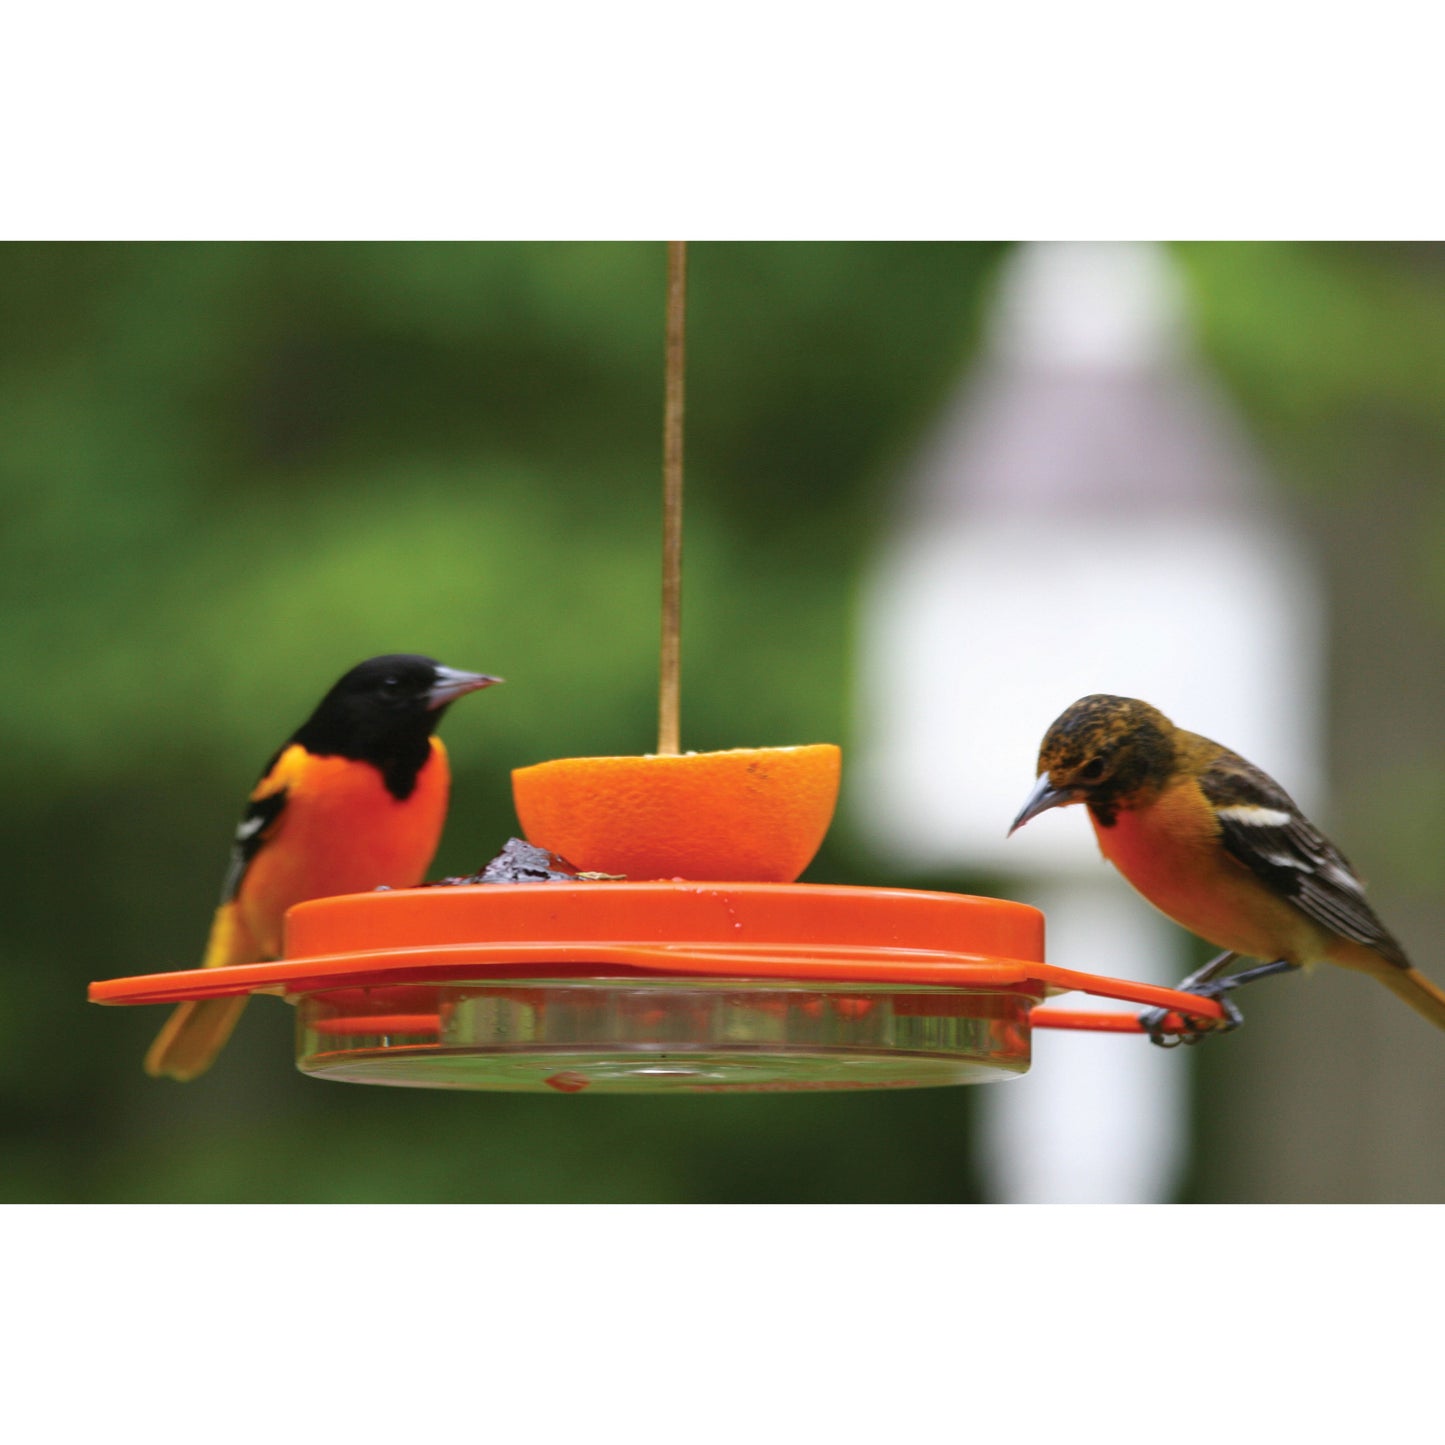 Orange oriole feeder with two Baltimore Orioles